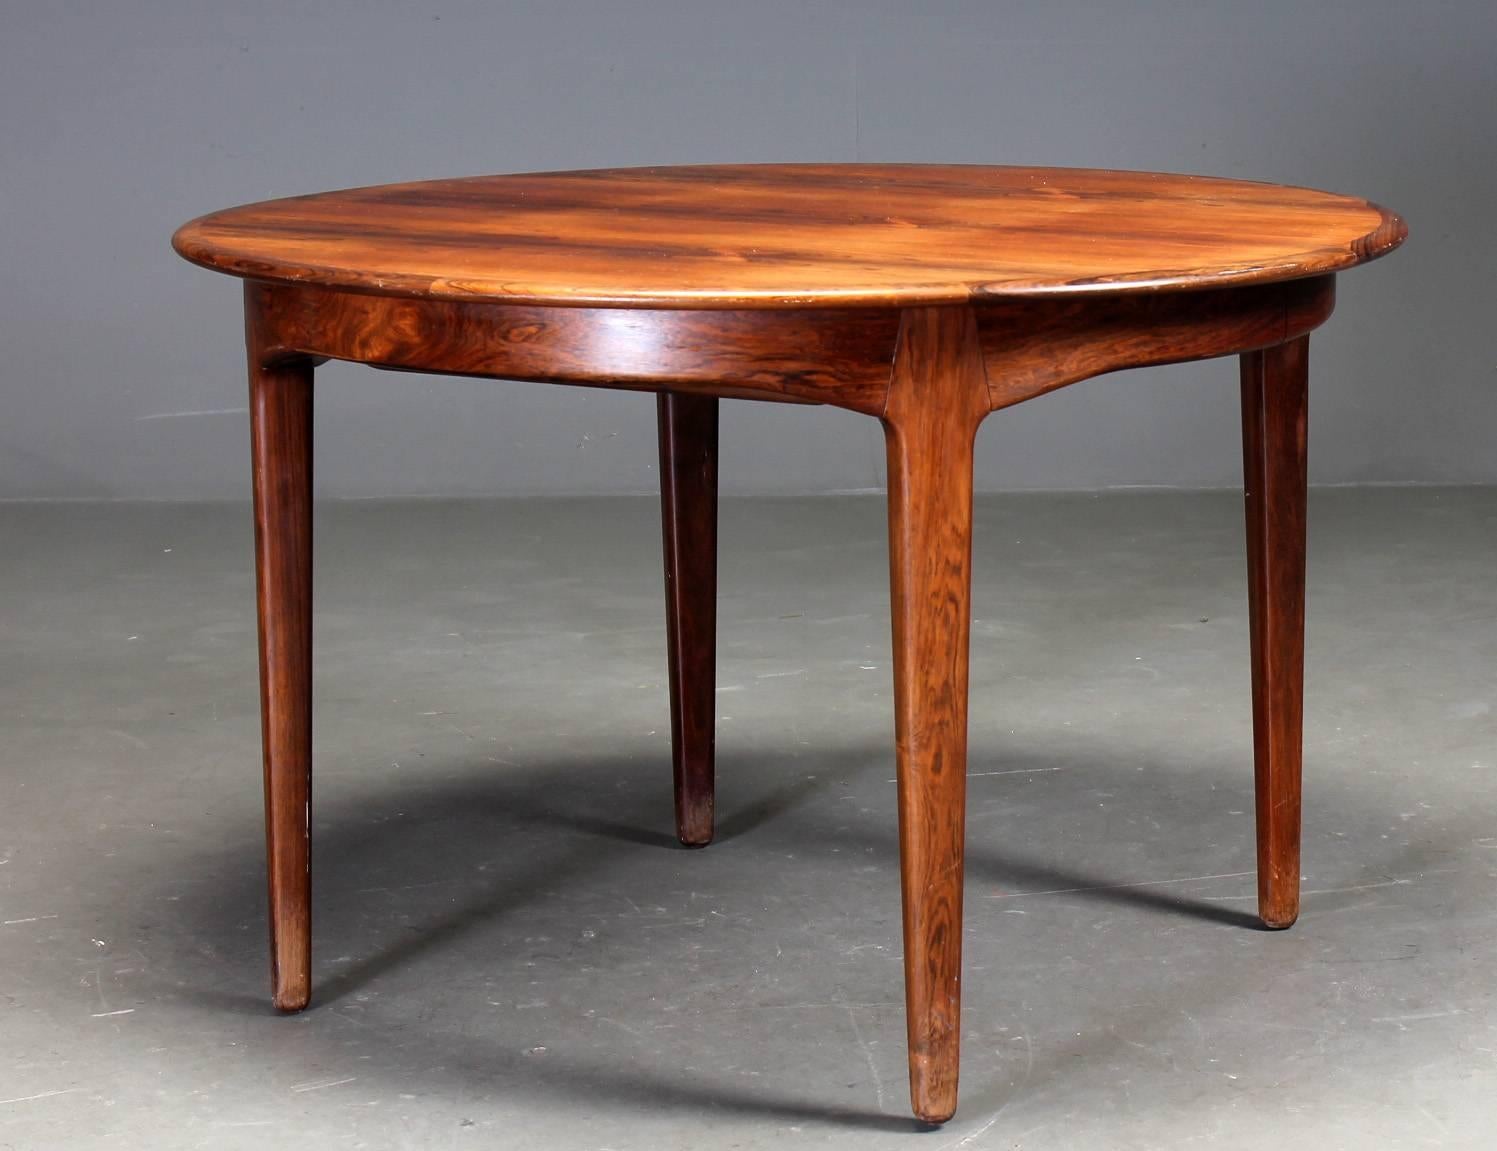 This round dining table extends to 275 cm was designed by Henning Kjaernulf in 1958 and made and labelled by Soro. The construction is extremely robust with each solid rosewood led sliding into slots in the apron of the table. This interlocking